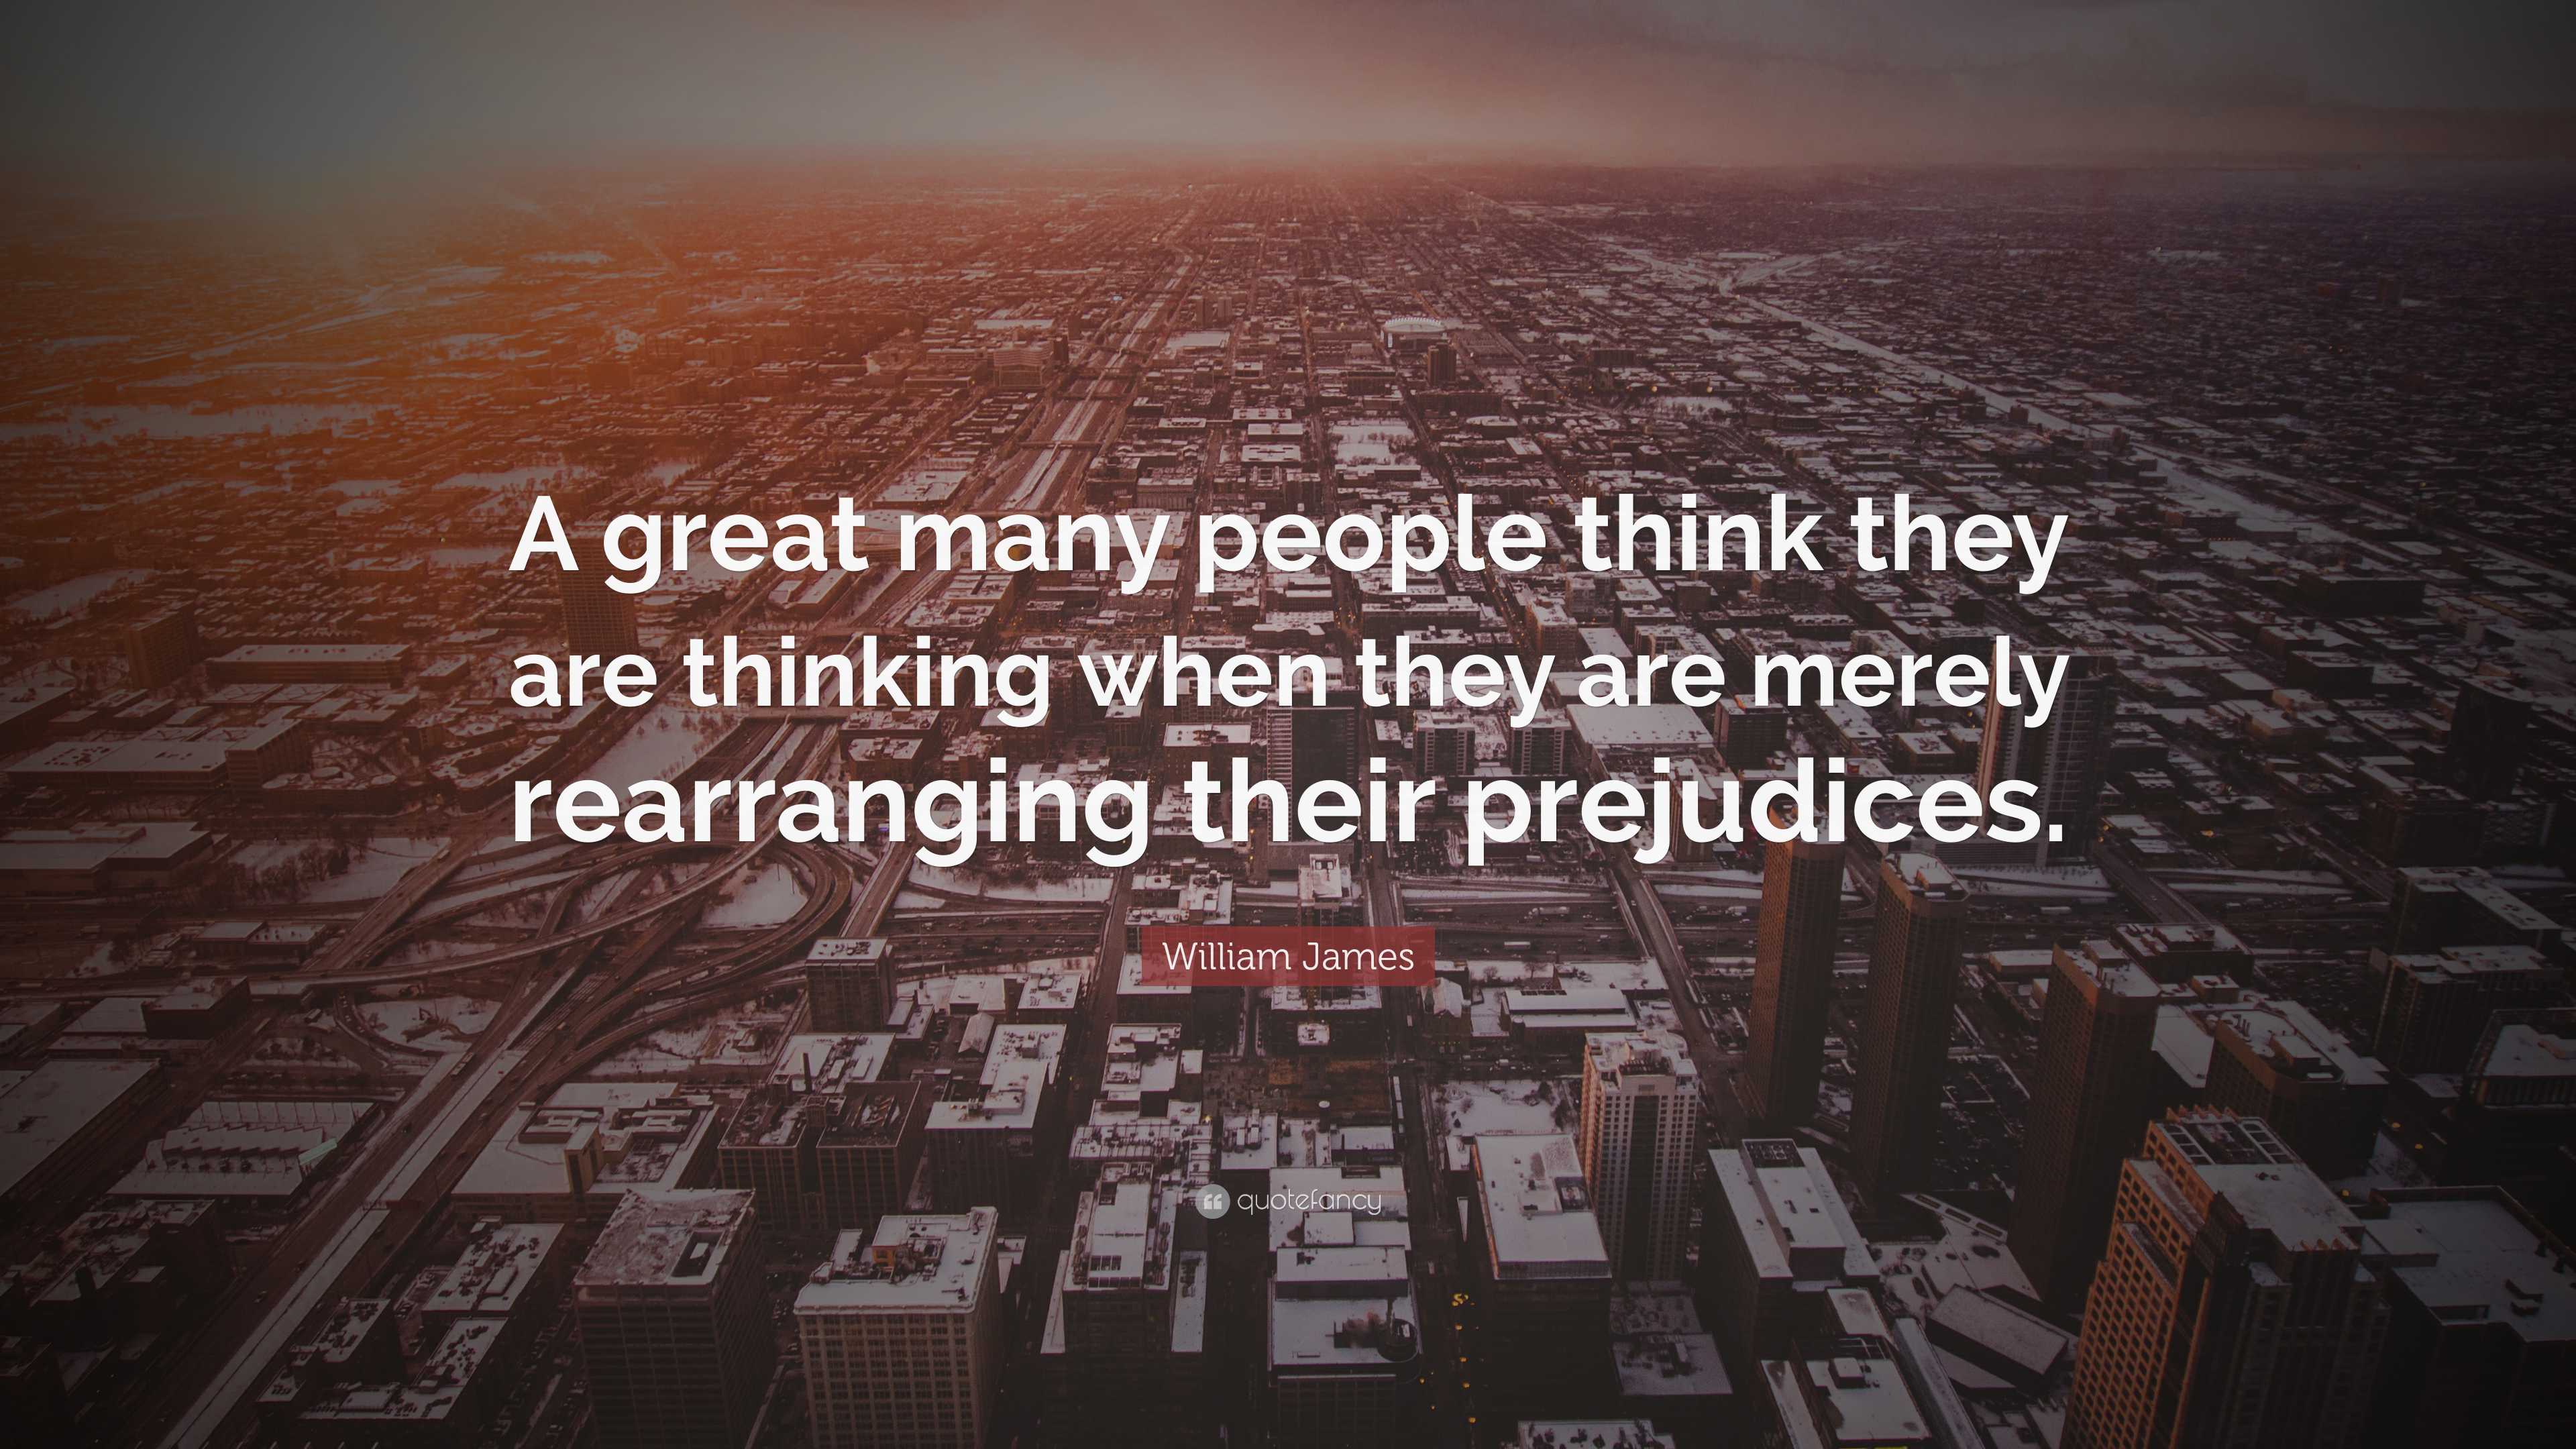 William James Quote: “A great many people think they are thinking when ...